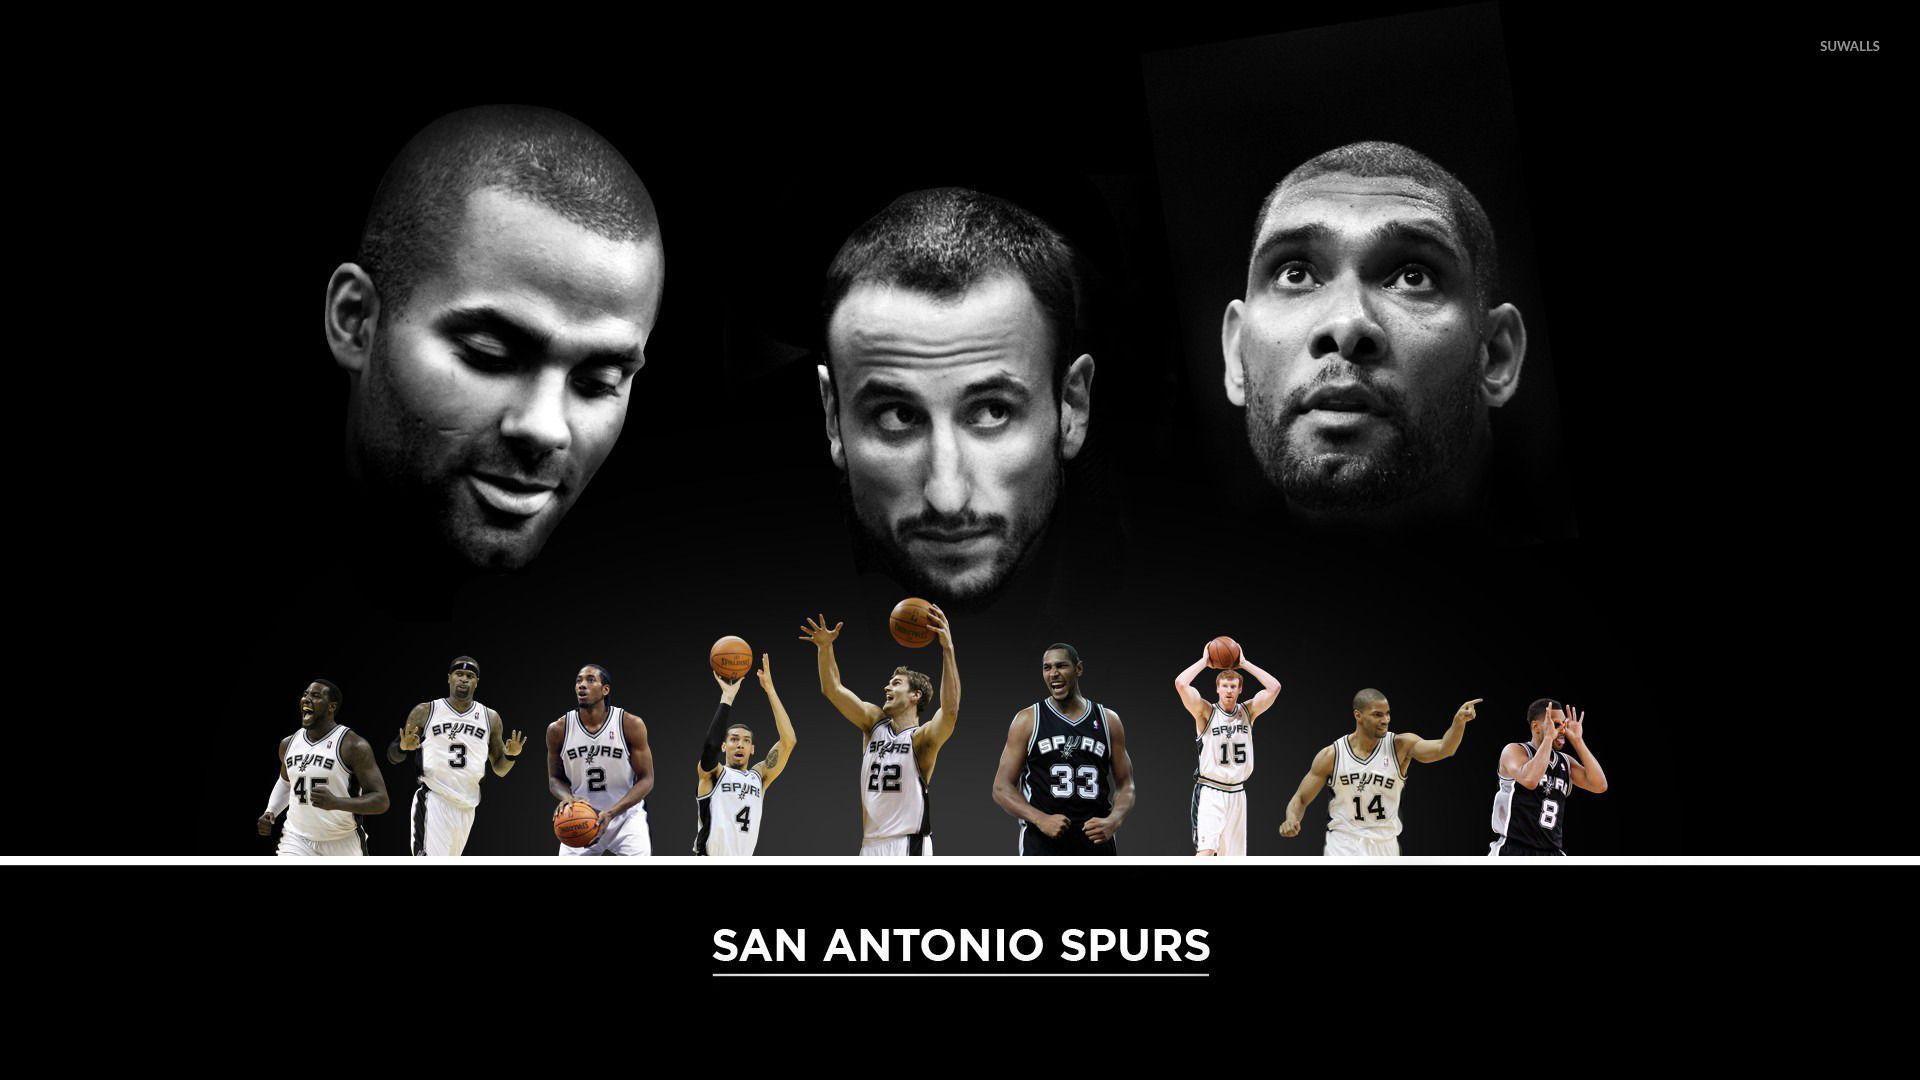 San Antonio Spurs Wallpapers and Backgrounds Image